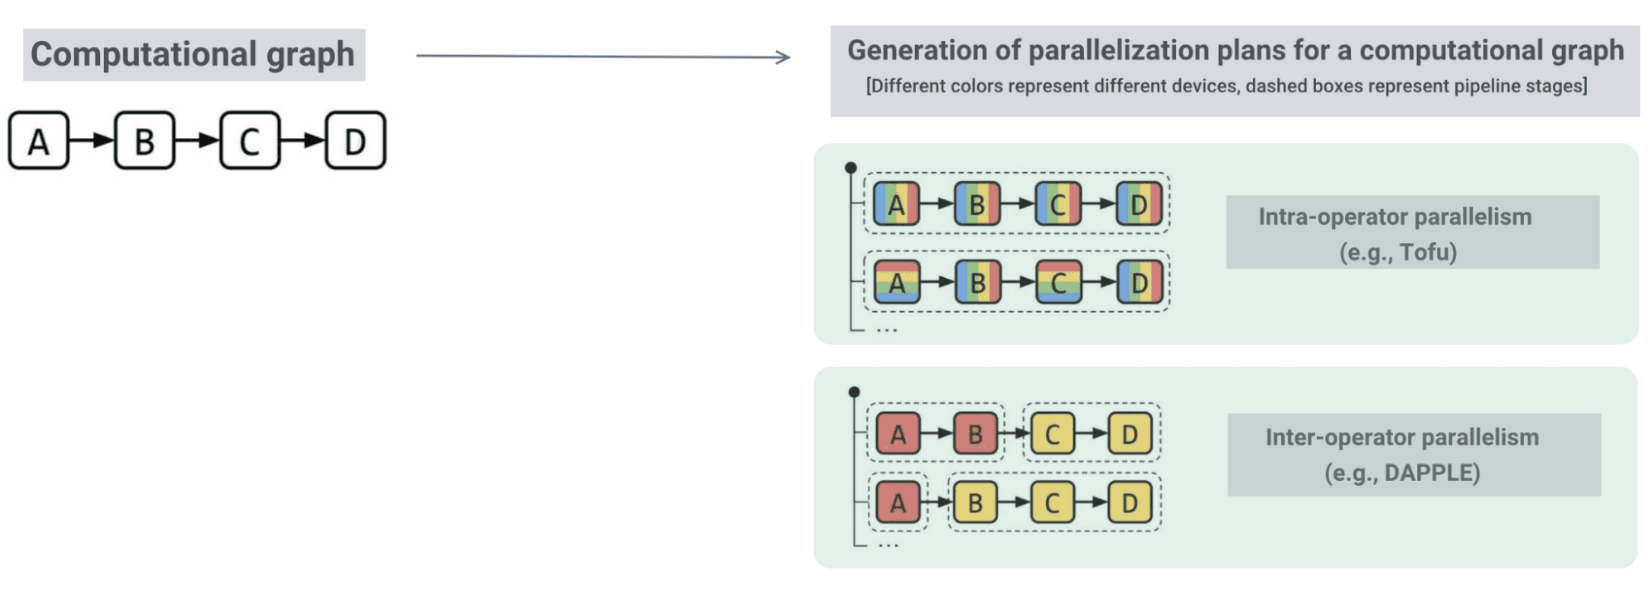 Parallelization plans for a computational graph from Alpa